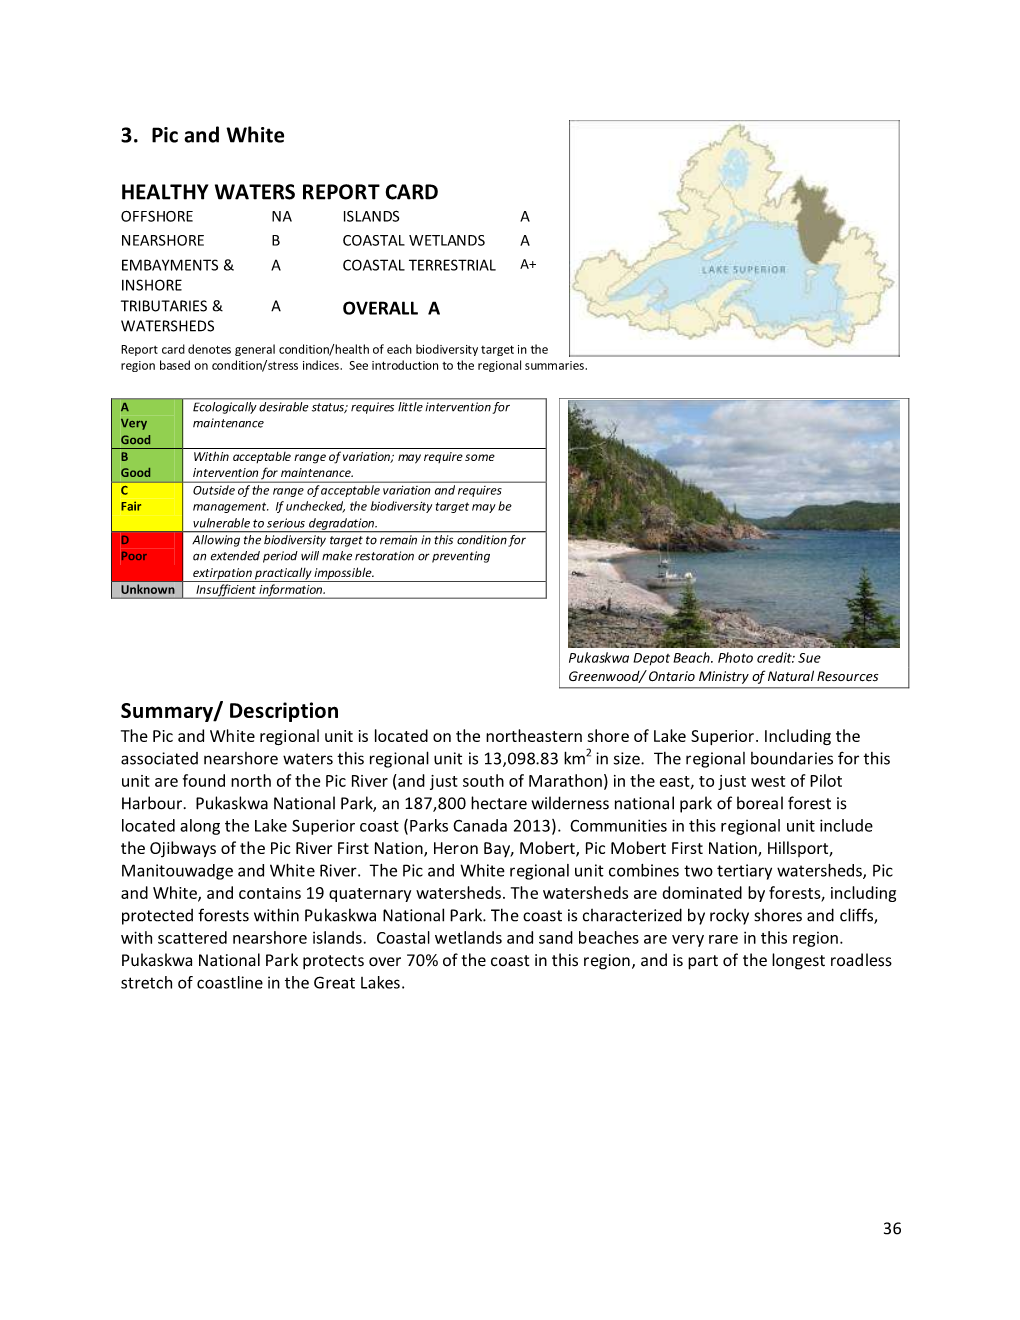 3. Pic and White HEALTHY WATERS REPORT CARD Summary